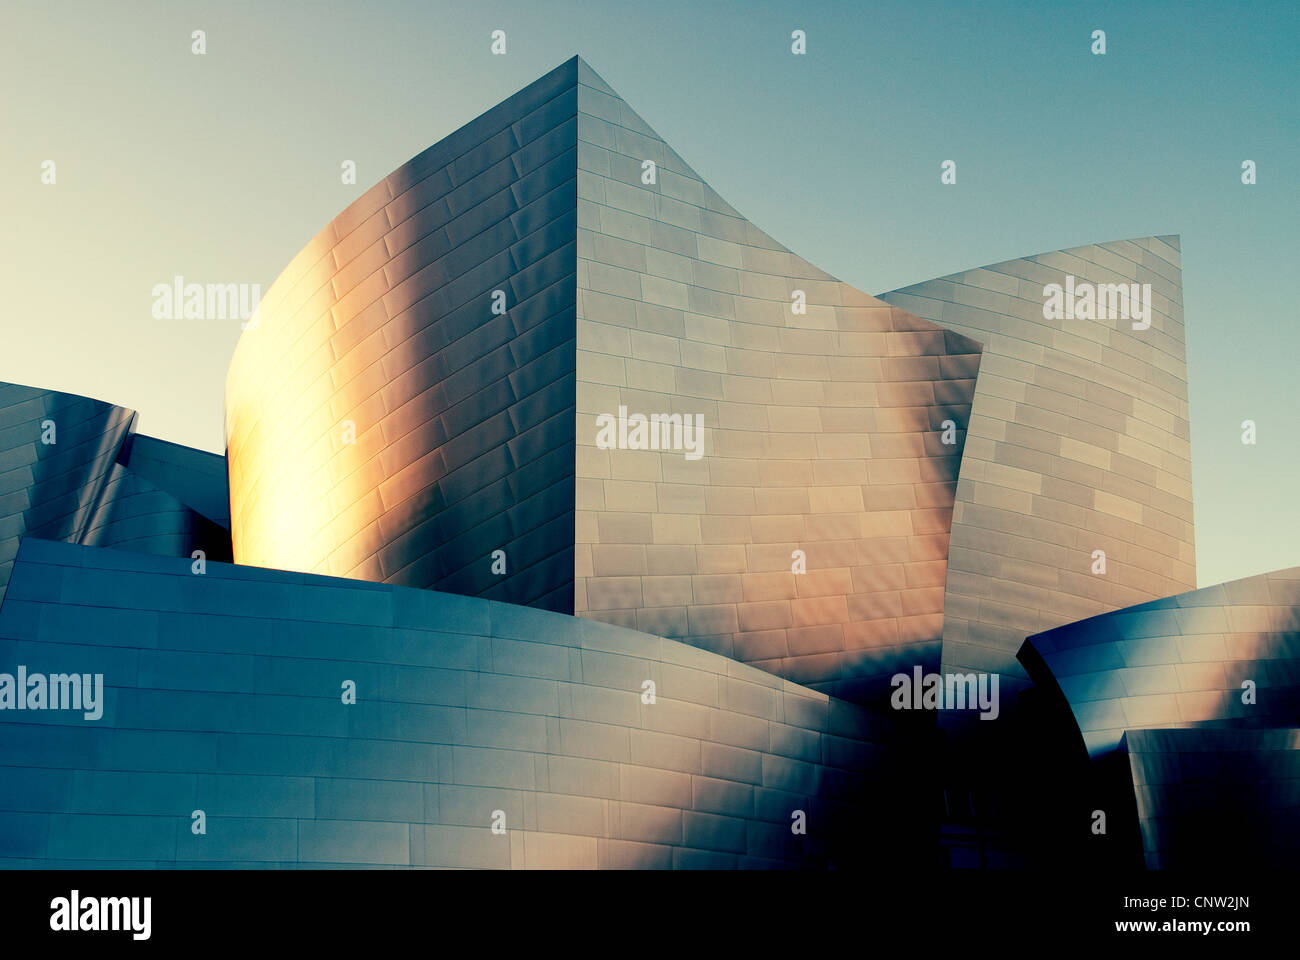 The Walt Disney Concert Hall at 111 South Grand Avenue in downtown Los Angeles, California. Stock Photo